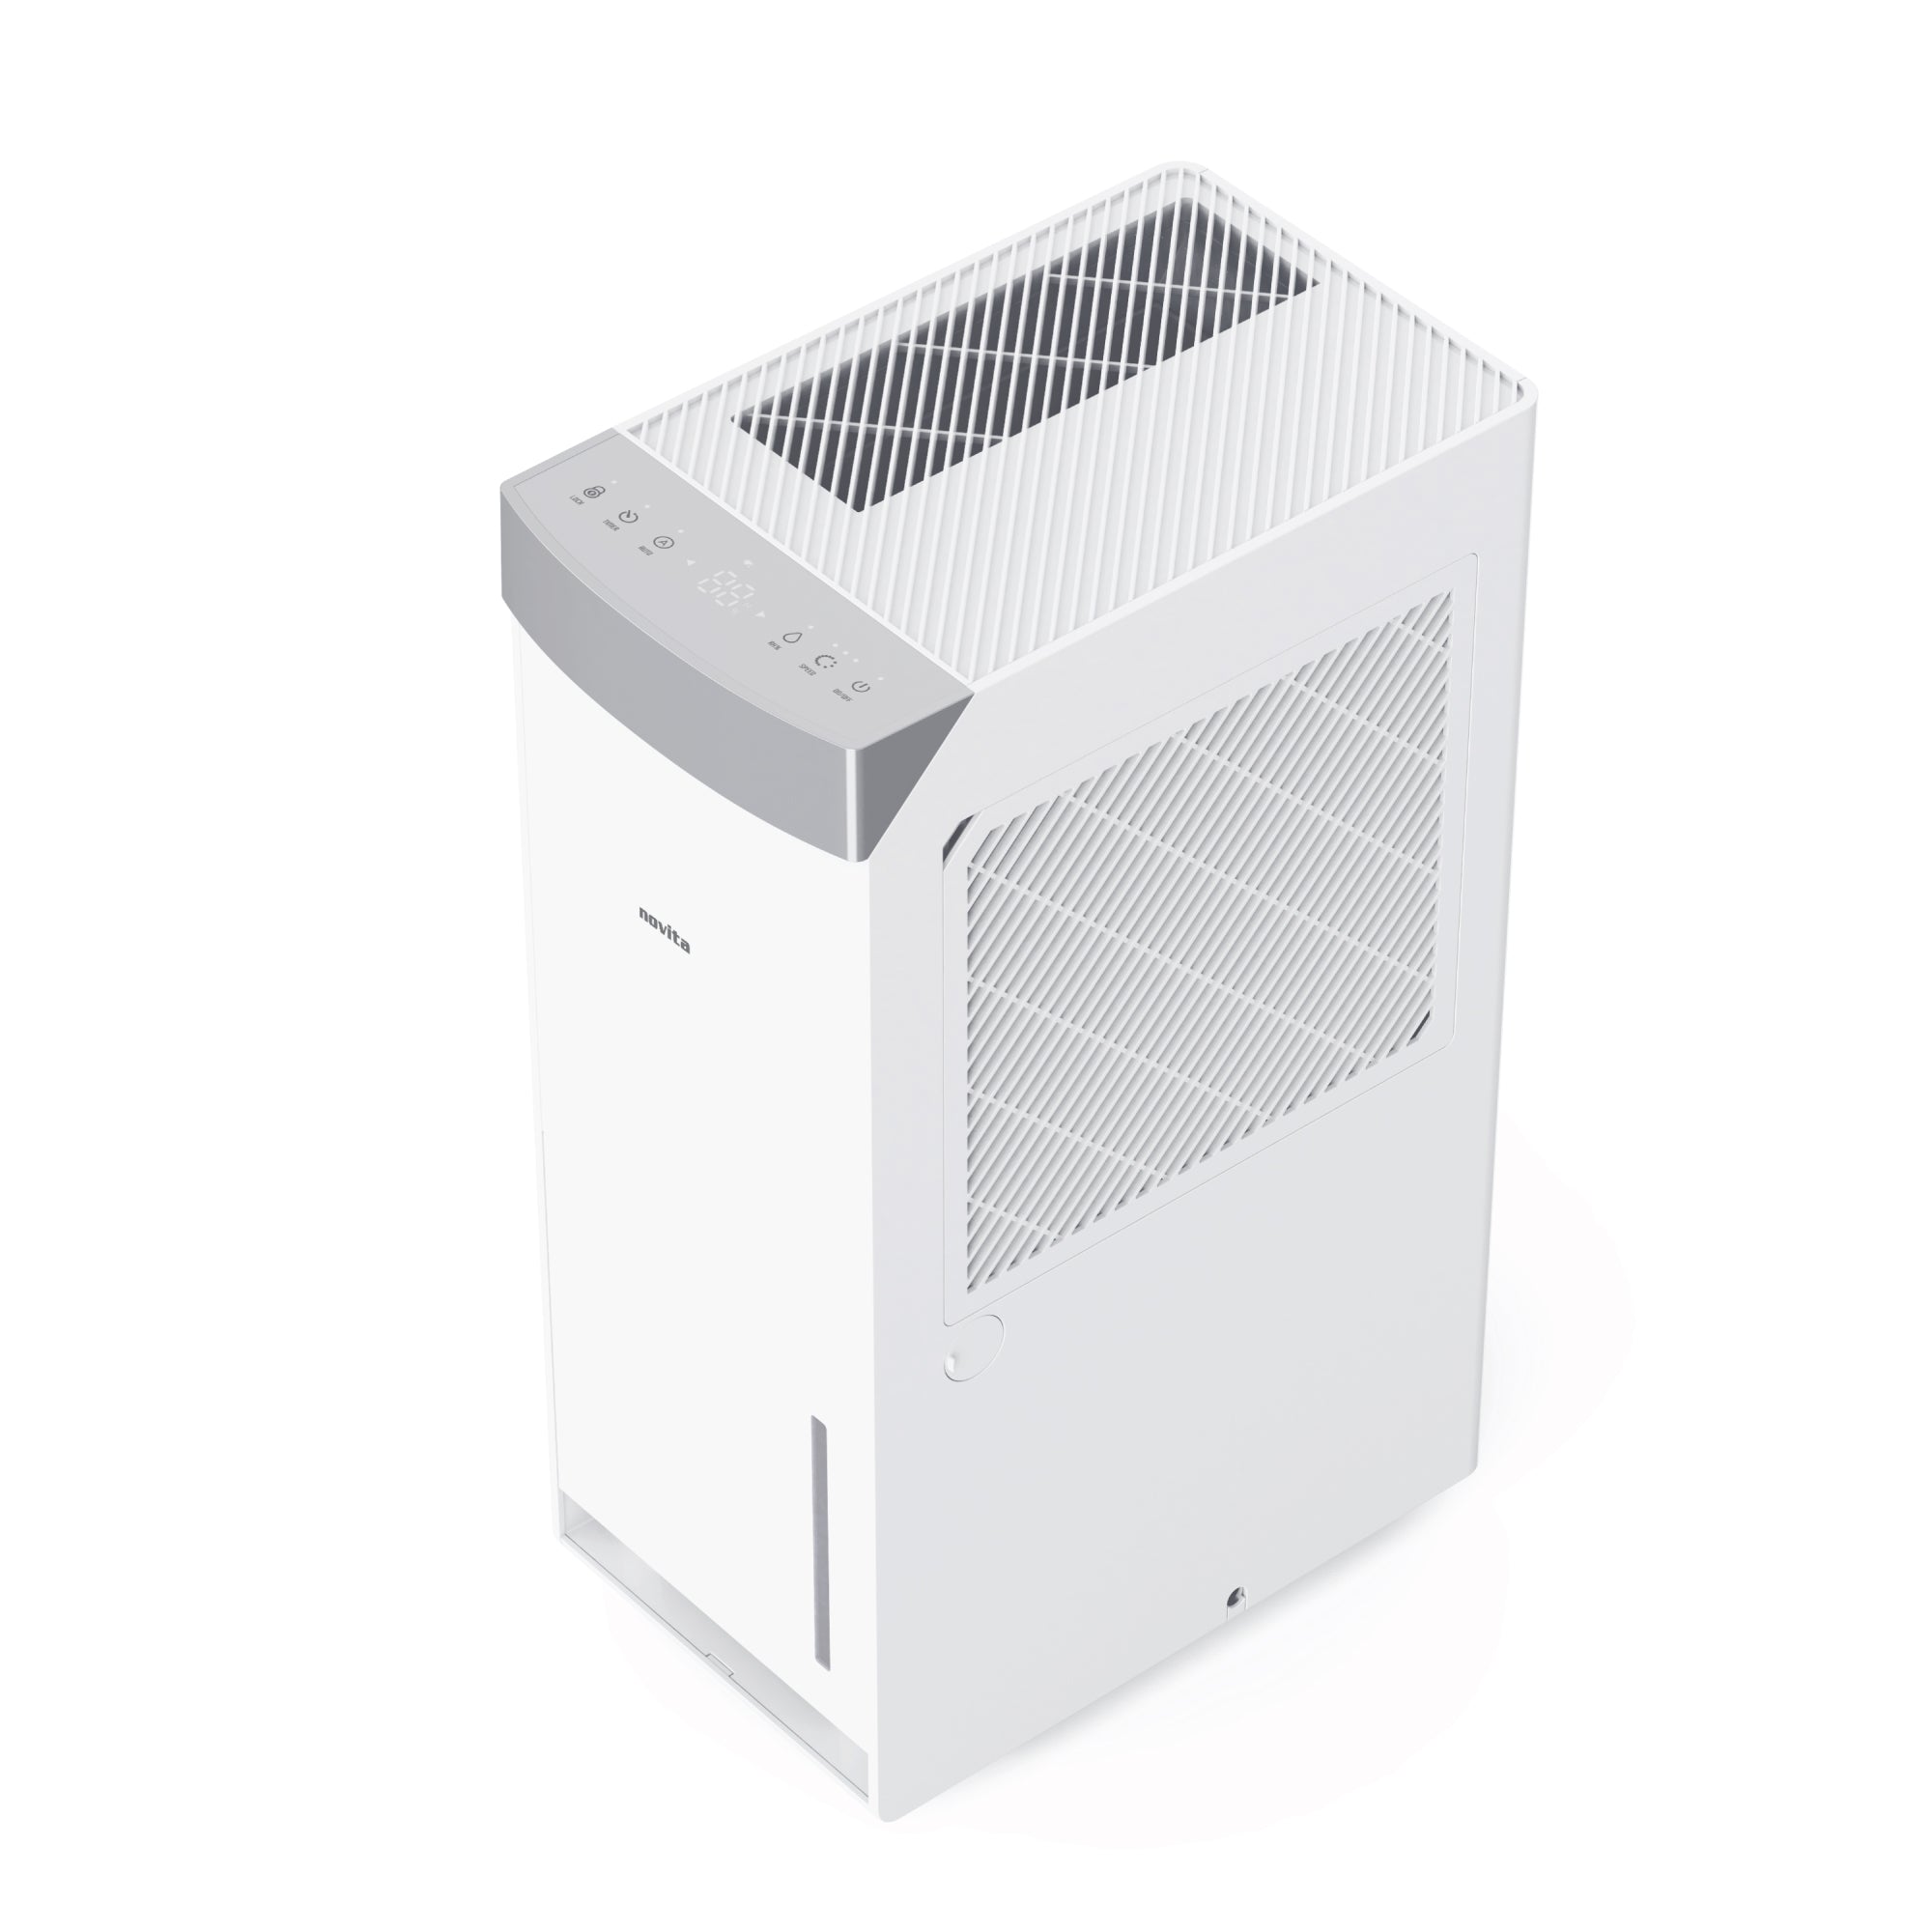 A white Dehumidifier ND388 by novita on a white background with terms and conditions.